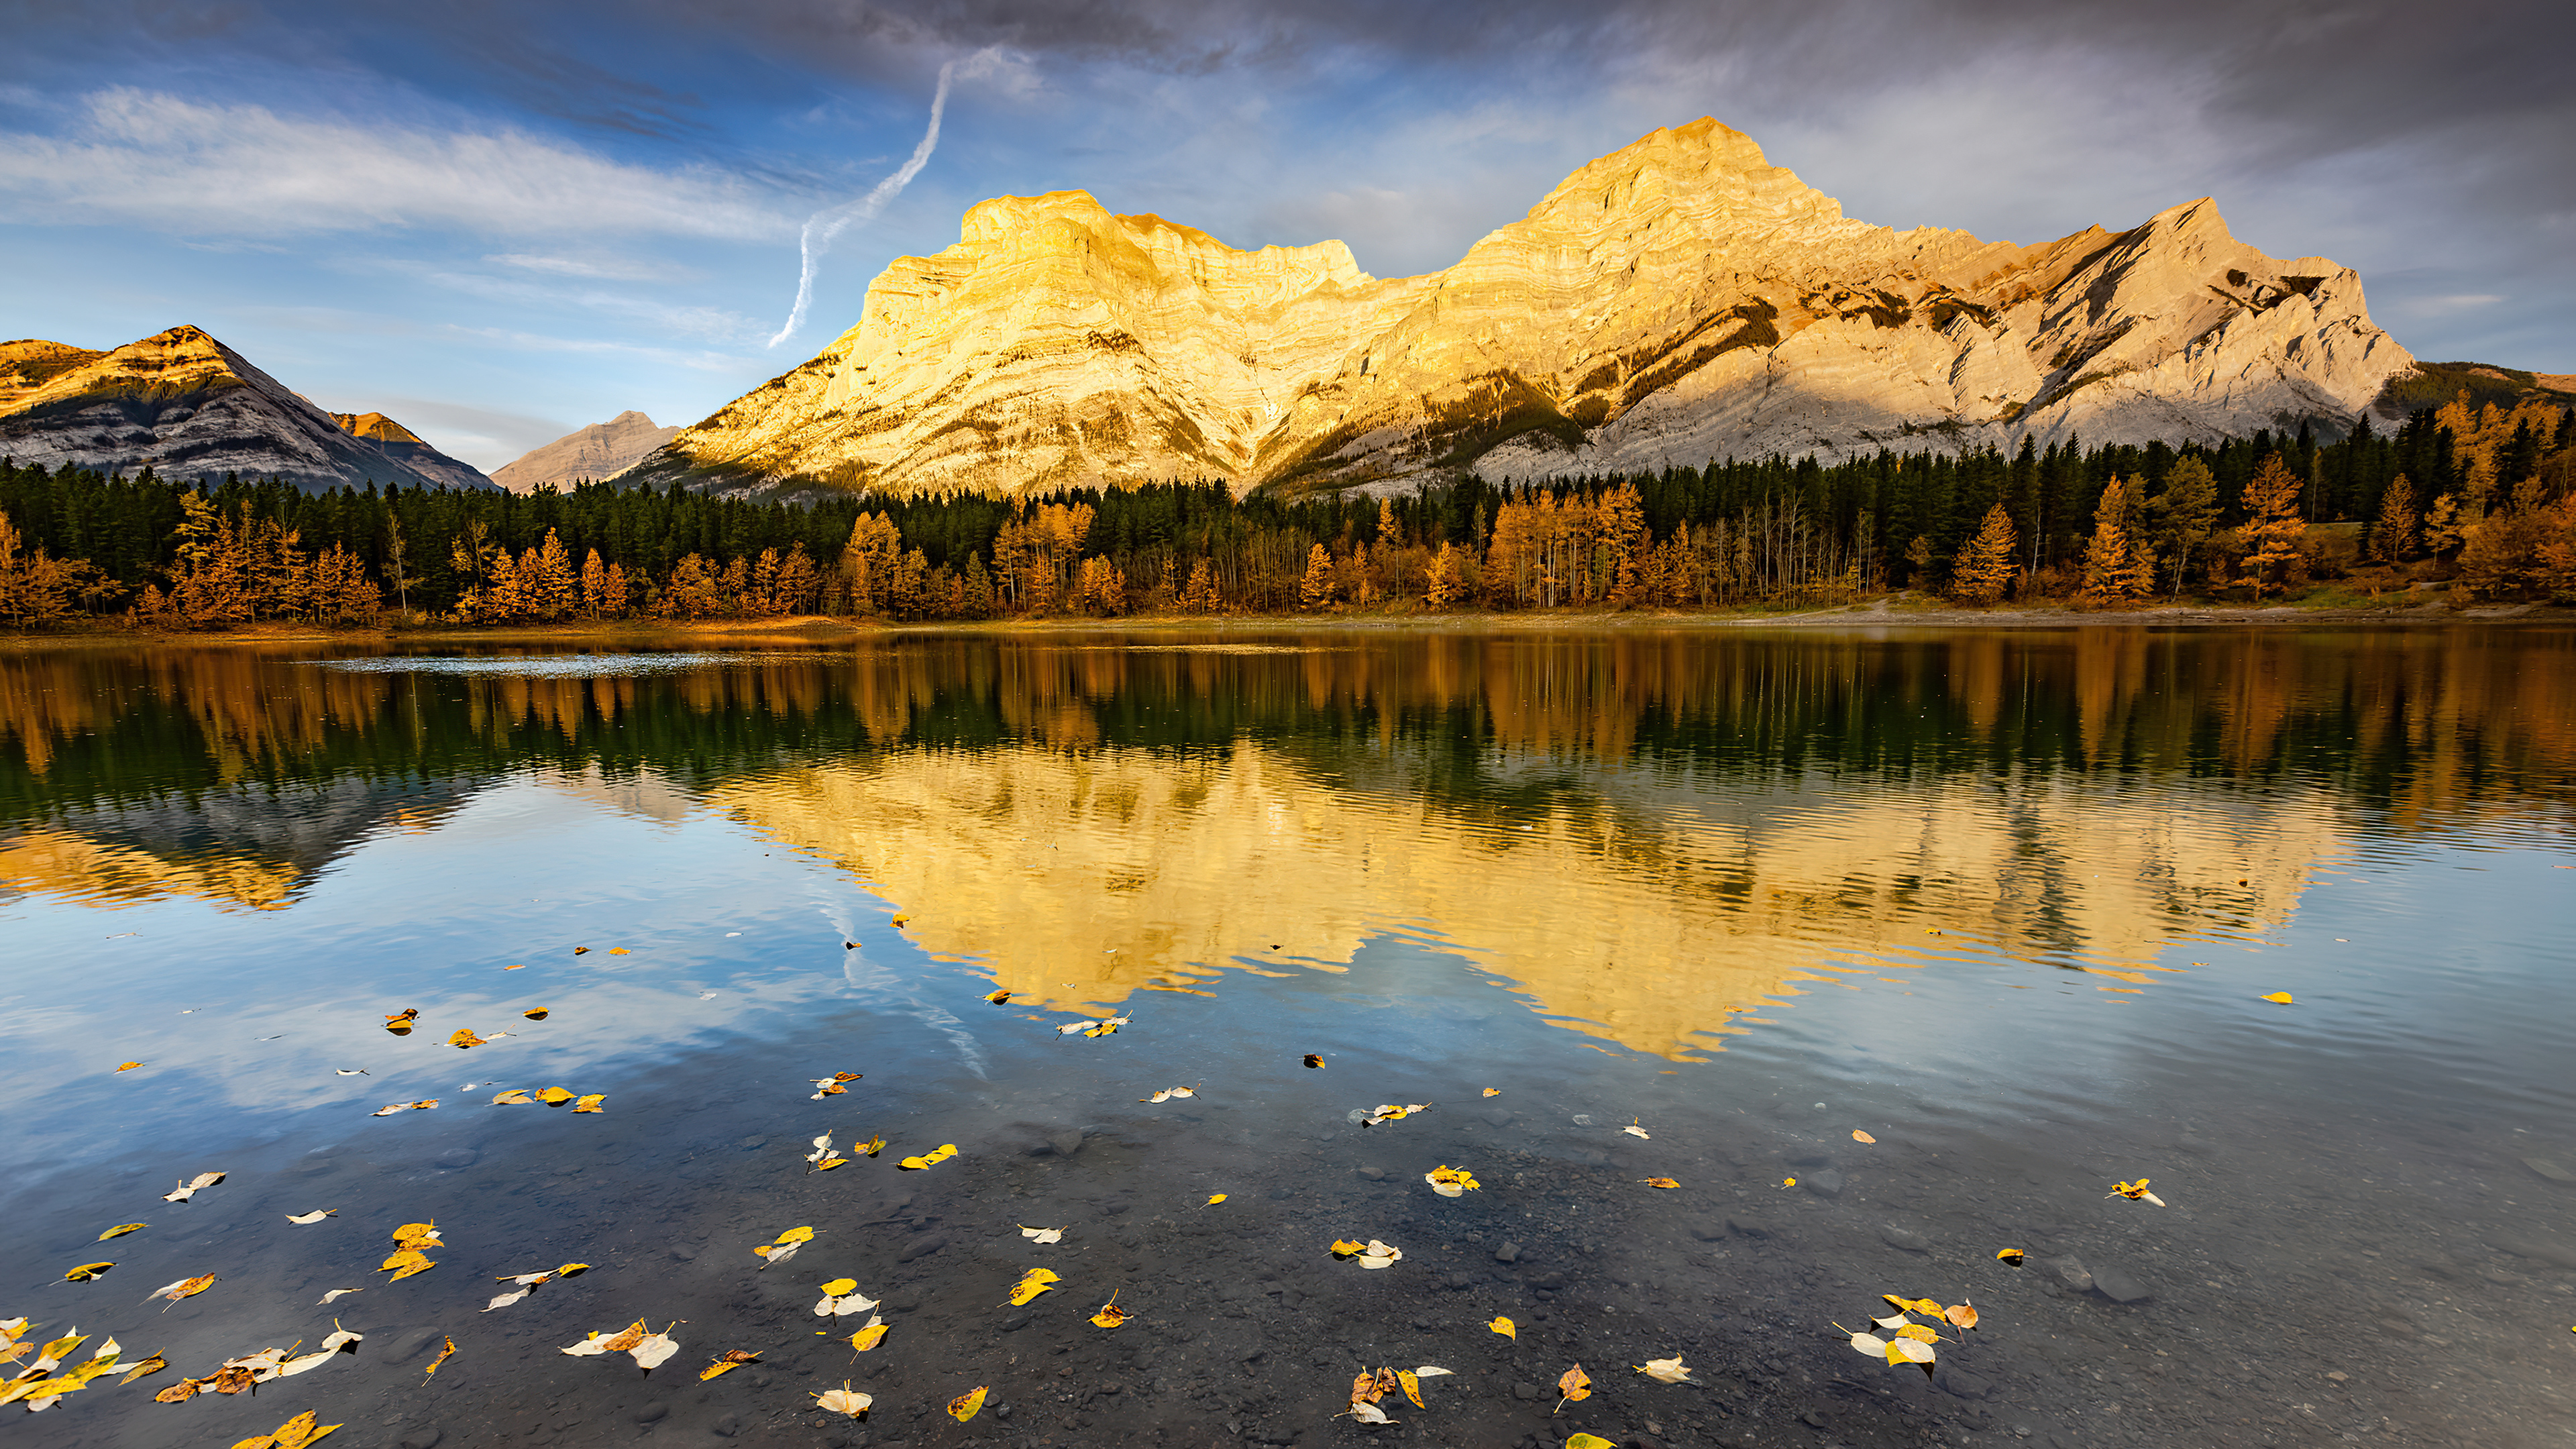 The sunlit mountains are reflected in the lake